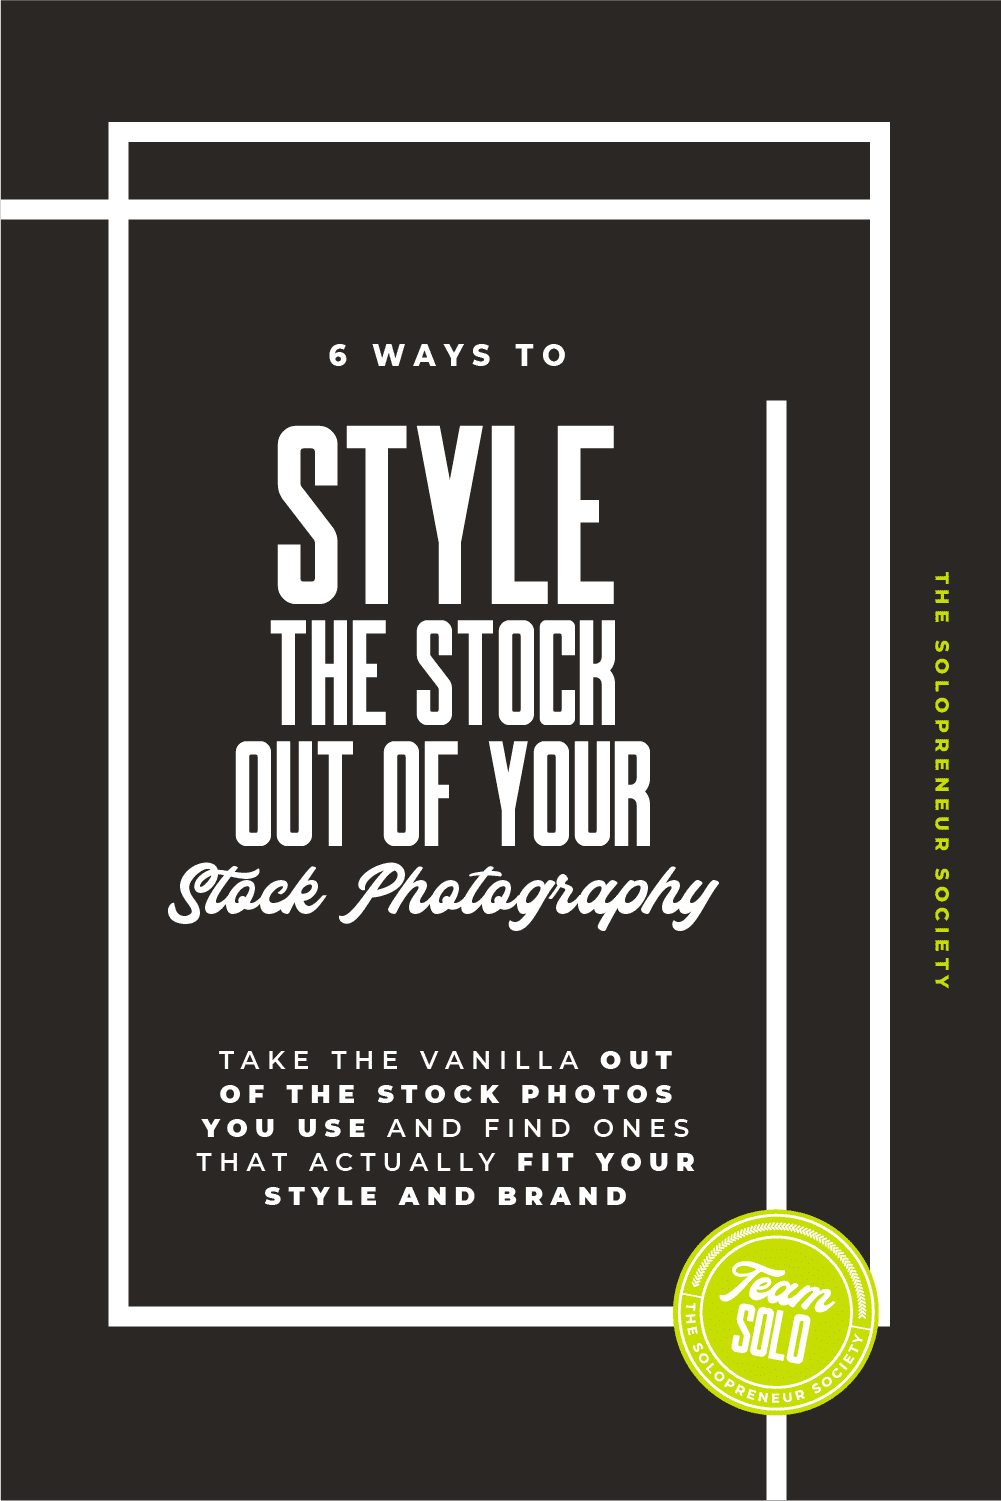 6 Ways To Style The “Stock” Out Of Your Stock Photography